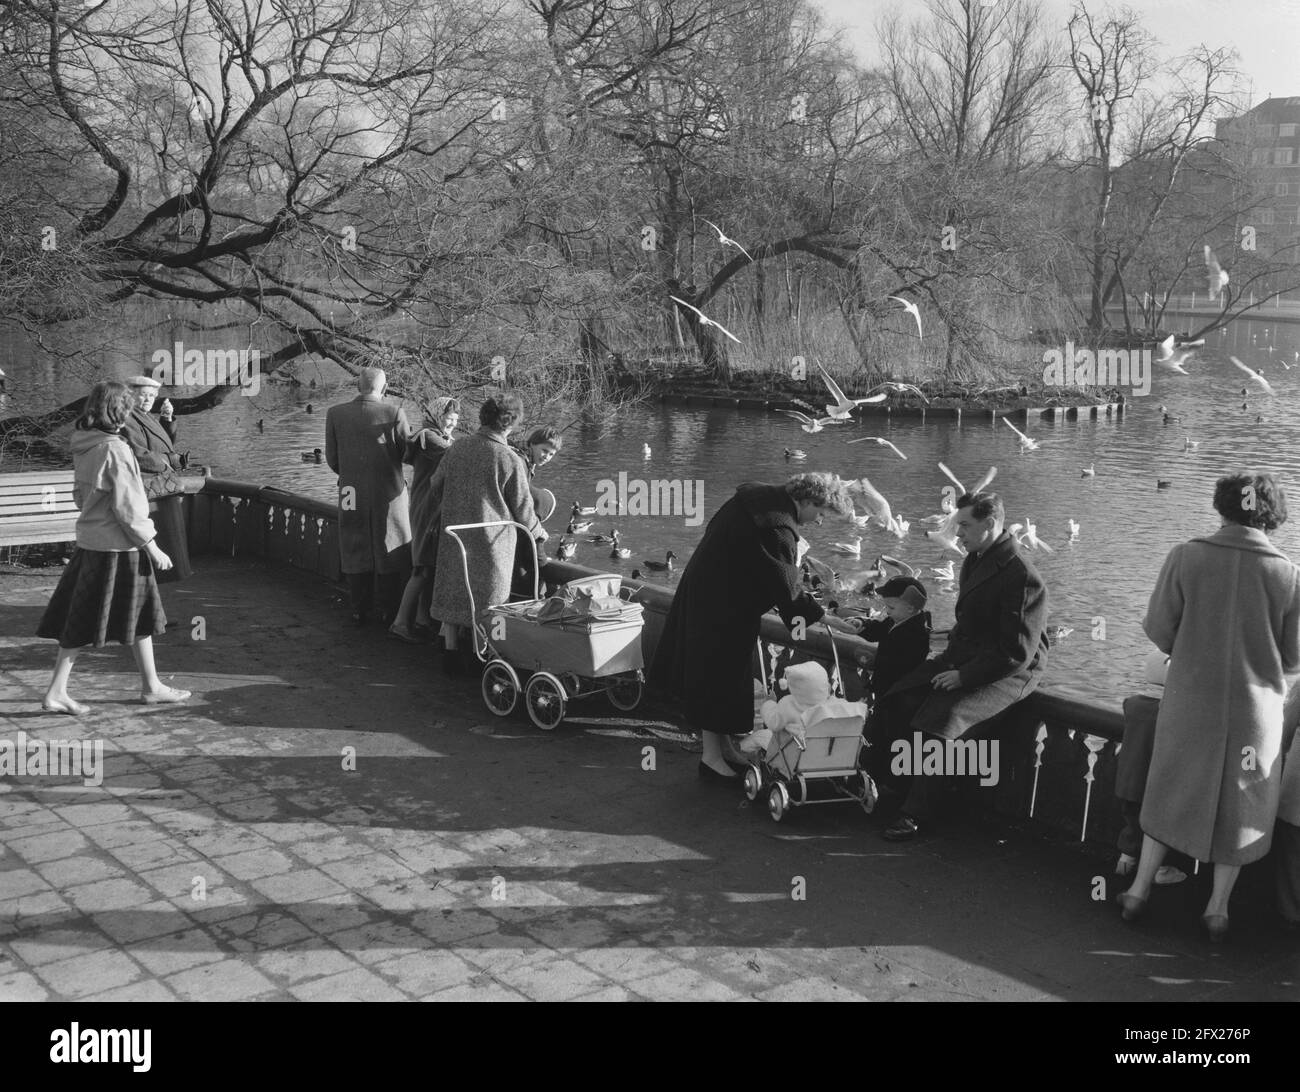 Spring weather in the Vondelpark, January 26, 1959, The Netherlands, 20th century press agency photo, news to remember, documentary, historic photography 1945-1990, visual stories, human history of the Twentieth Century, capturing moments in time Stock Photo